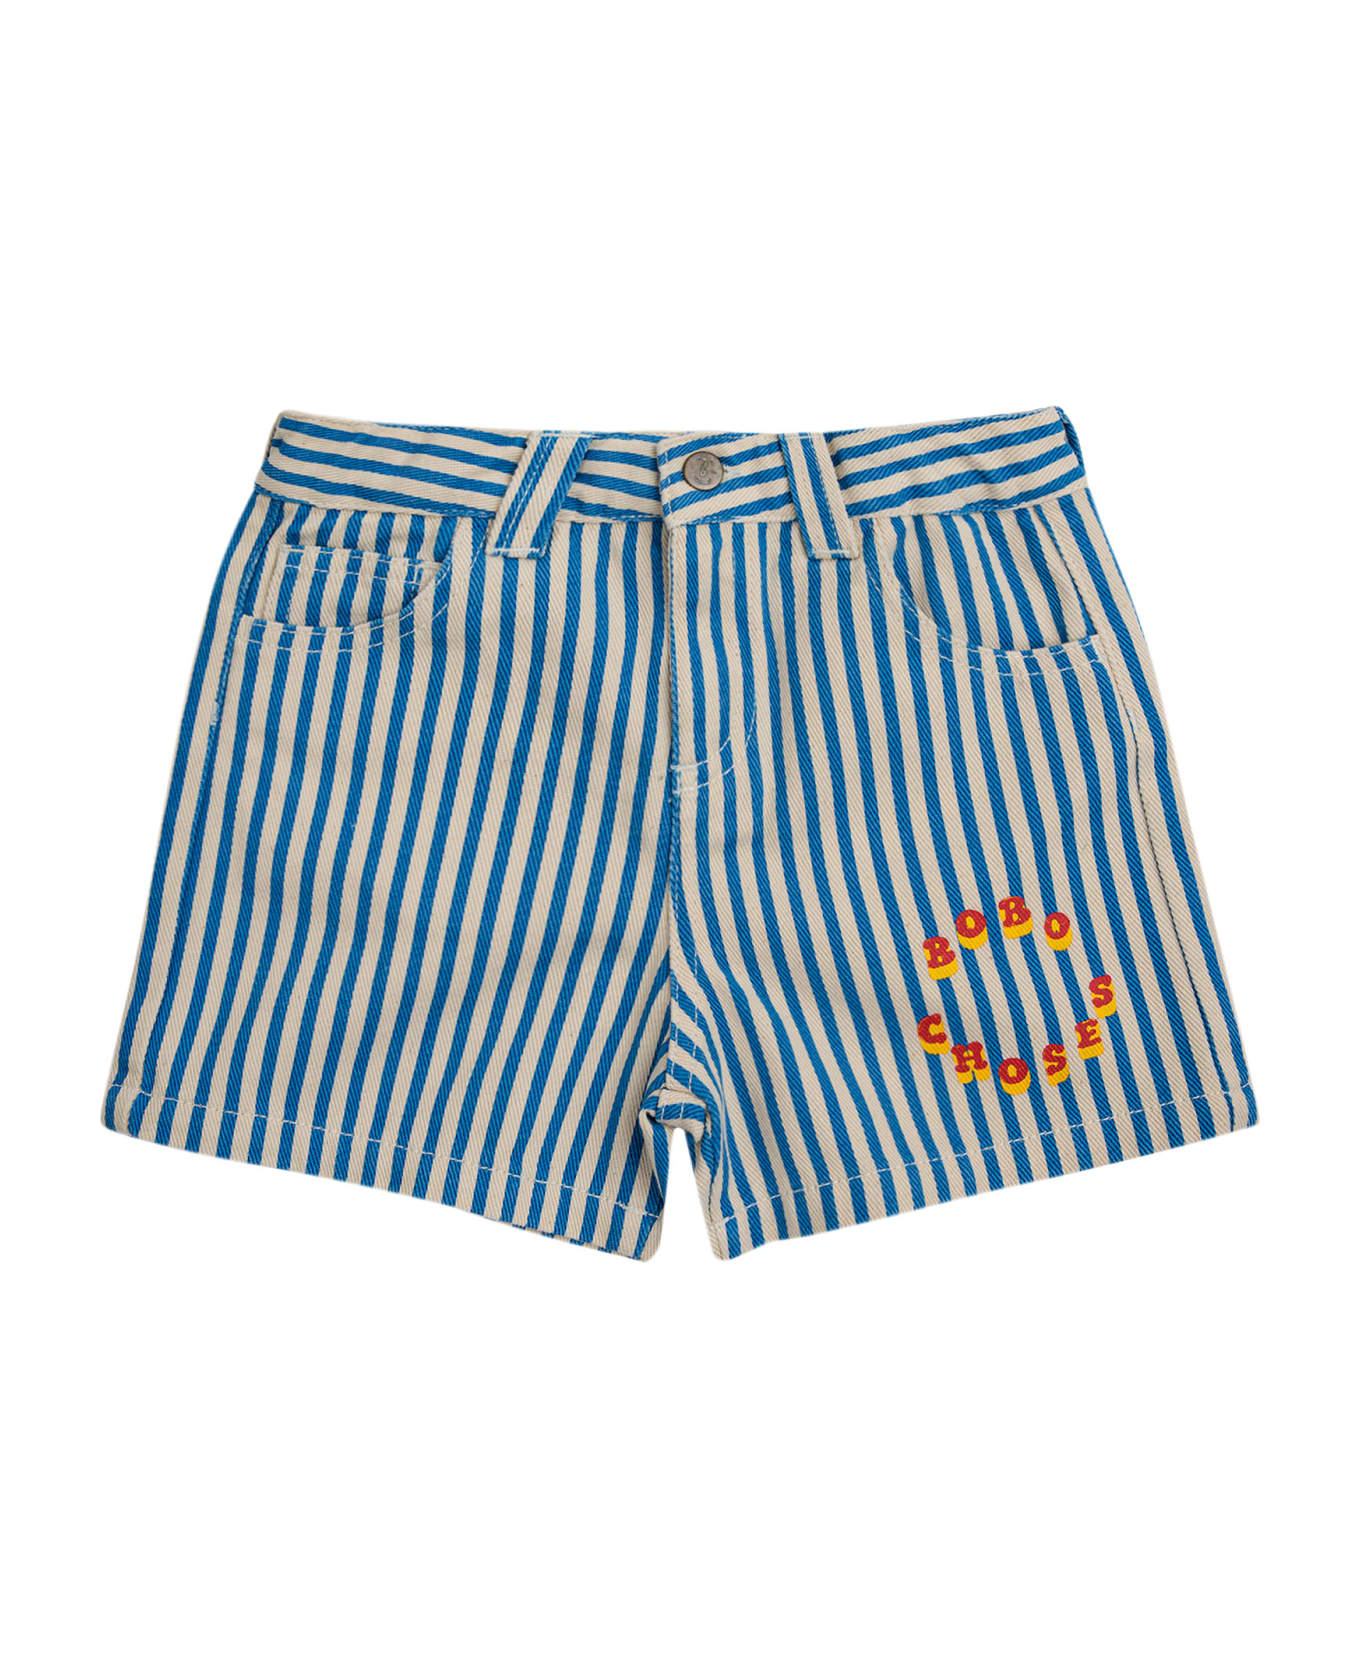 Bobo Choses Striped Shorts With bords For Kids - Blue